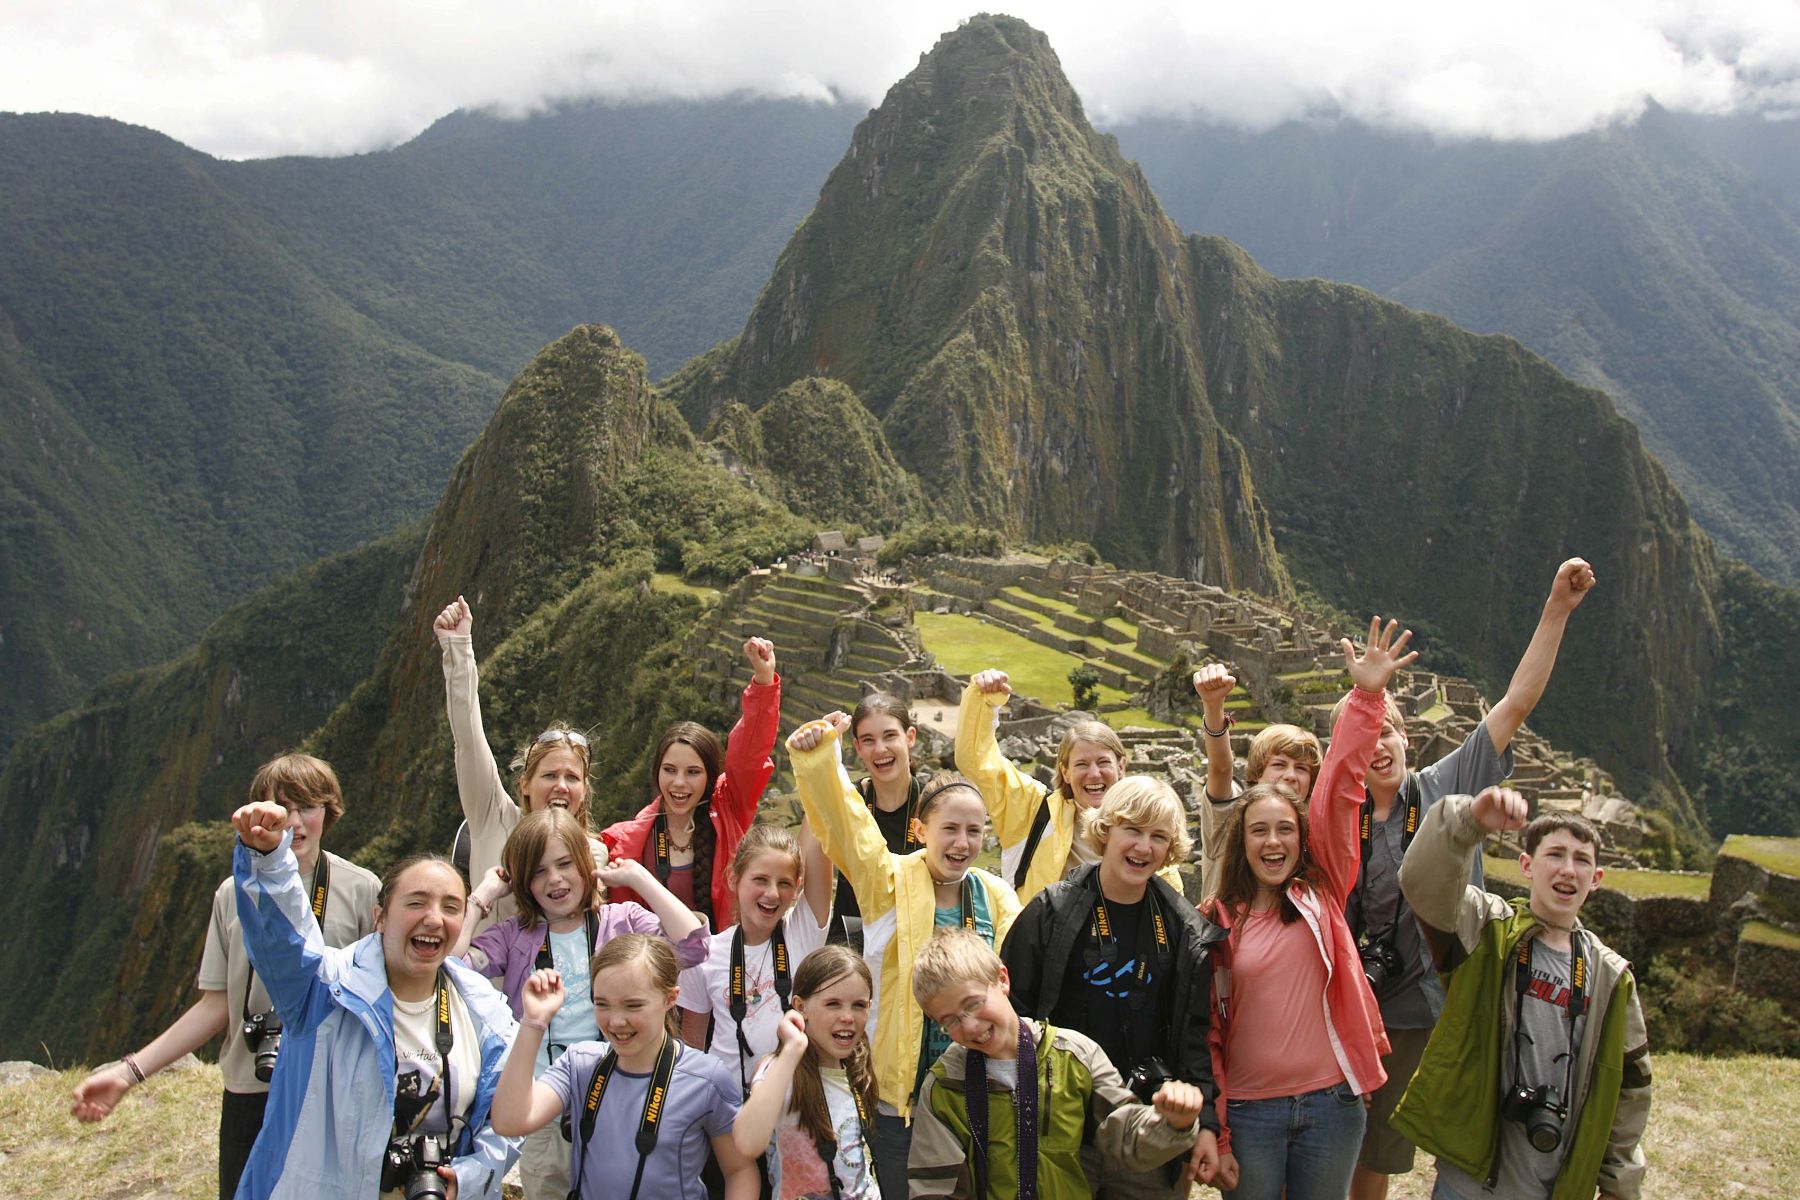 Foreign tourists in Machu Picchu